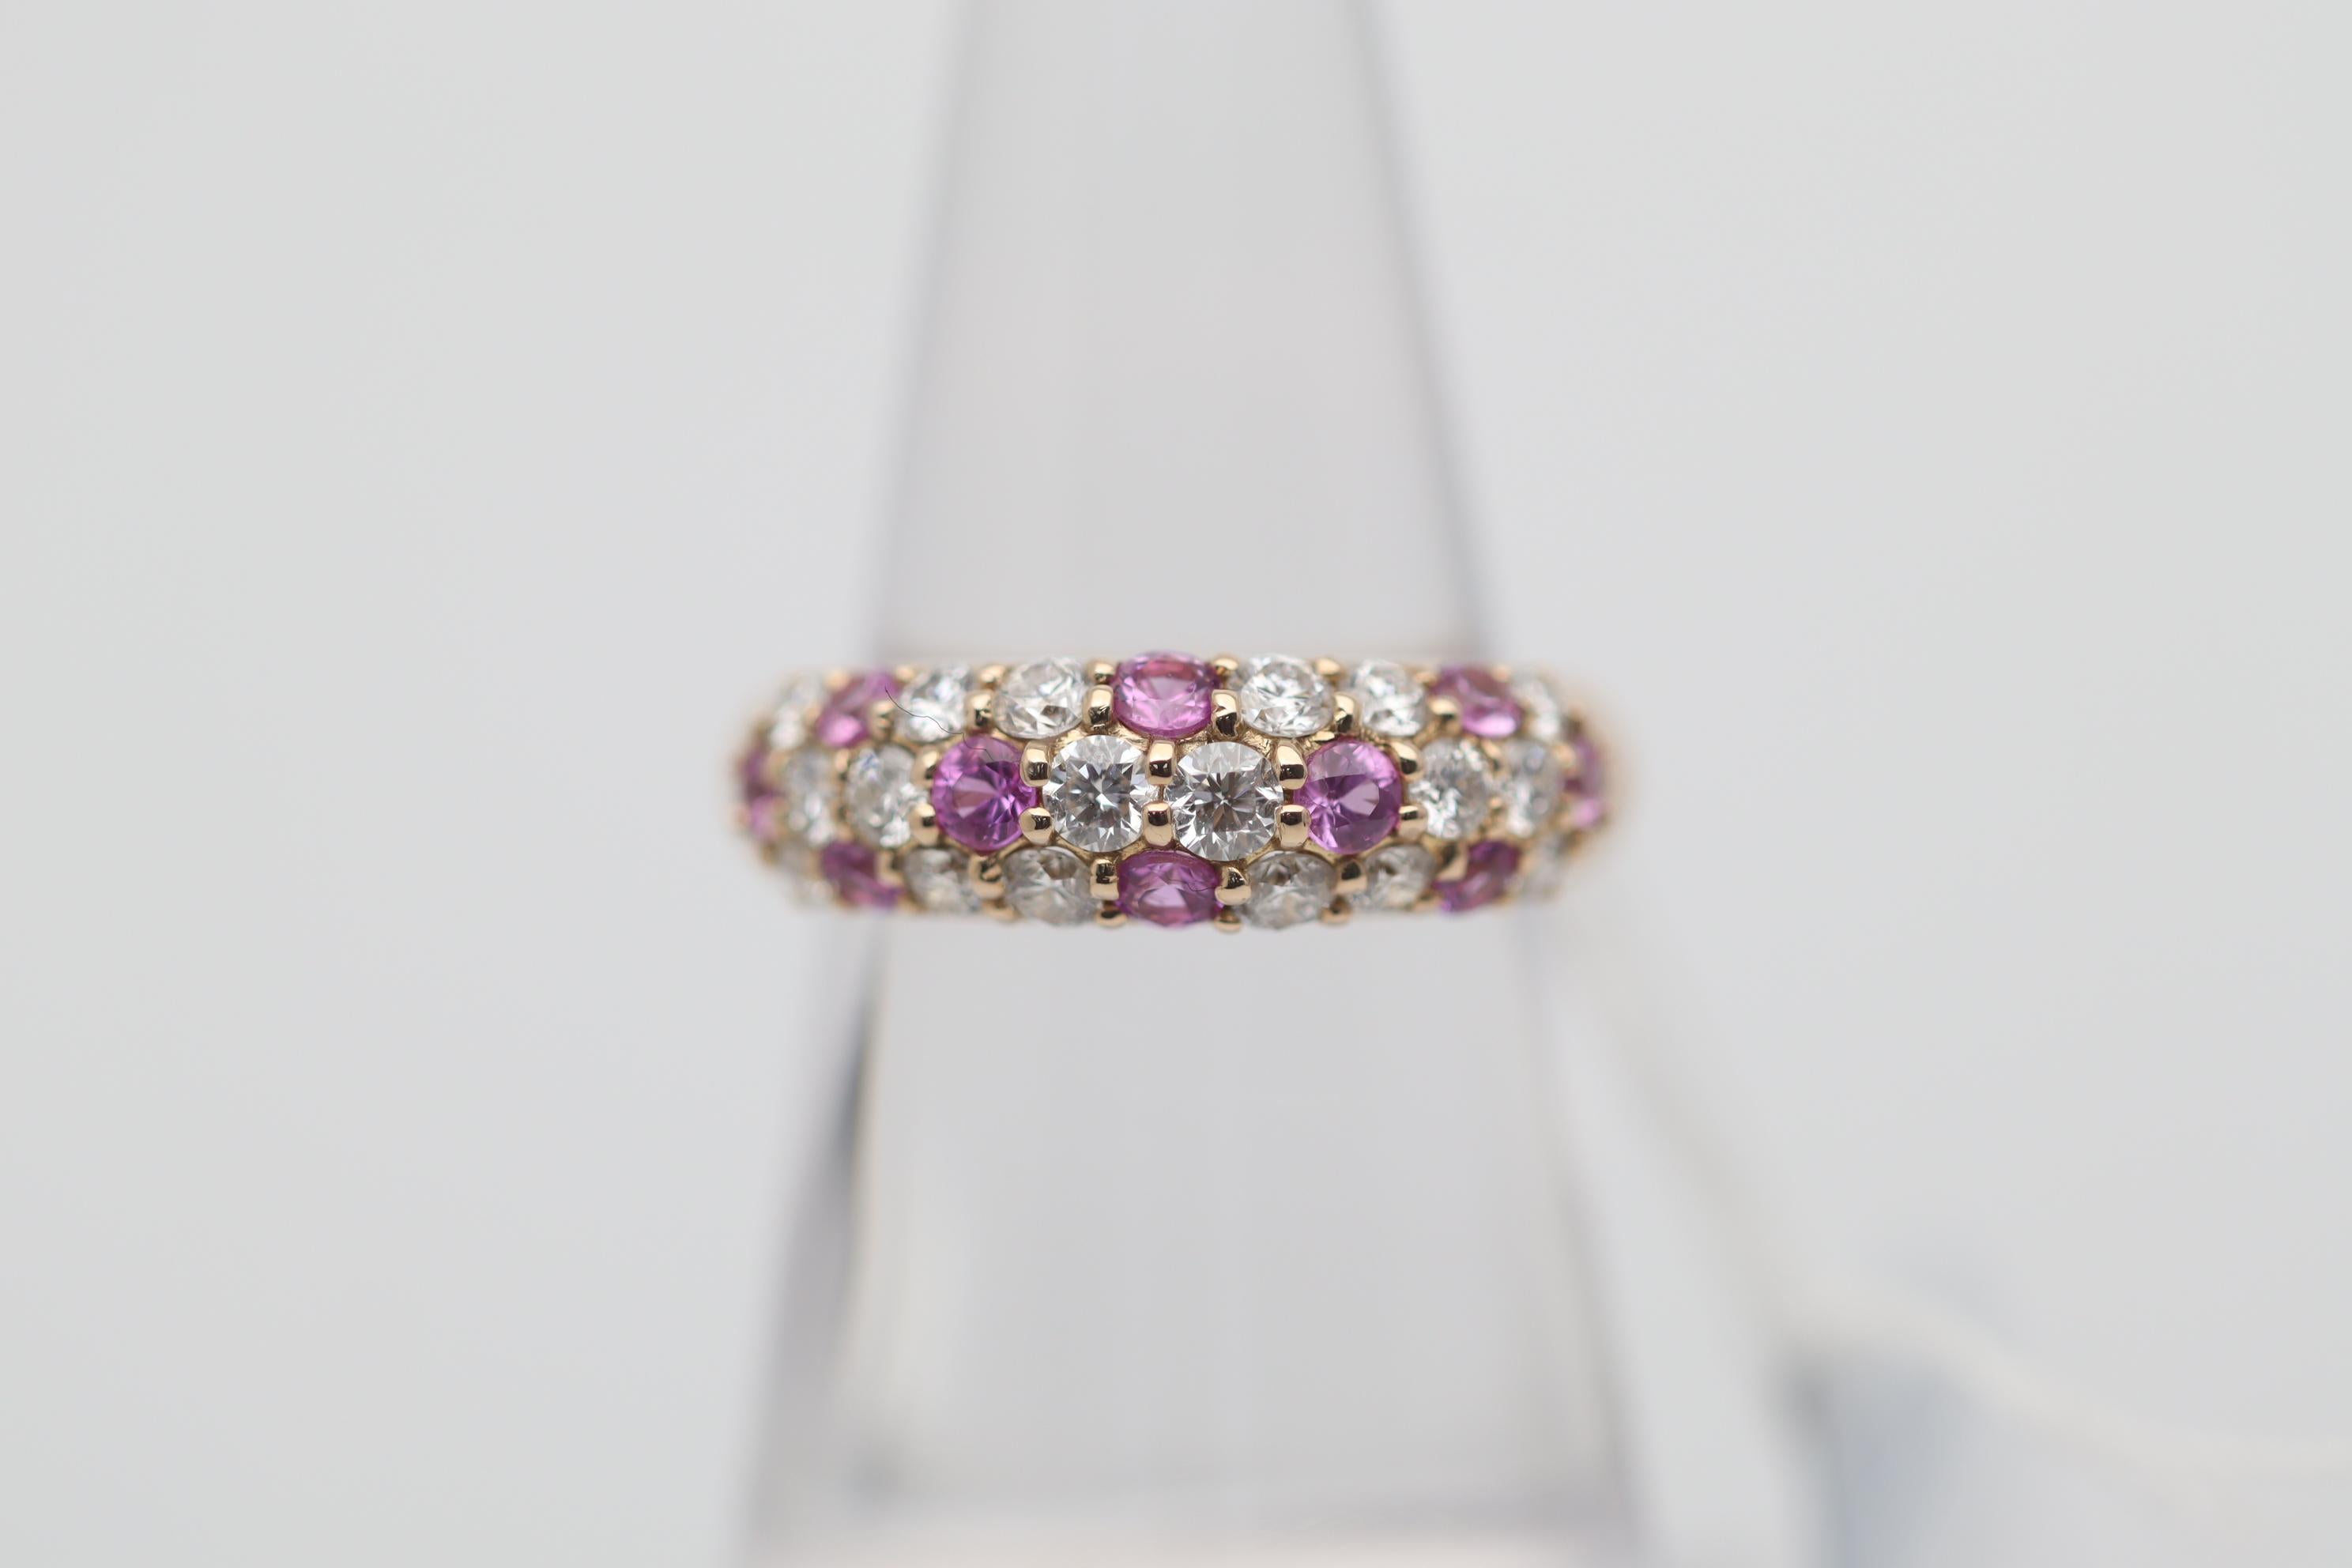 A simple yet stylish gold band featuring fine pink sapphires and diamonds! The diamonds weigh a total of 0.66 carats and blanket the top portion of the band. Poke-doting the diamonds are 10 pink sapphires weighing a total of 0.85 carats which add a